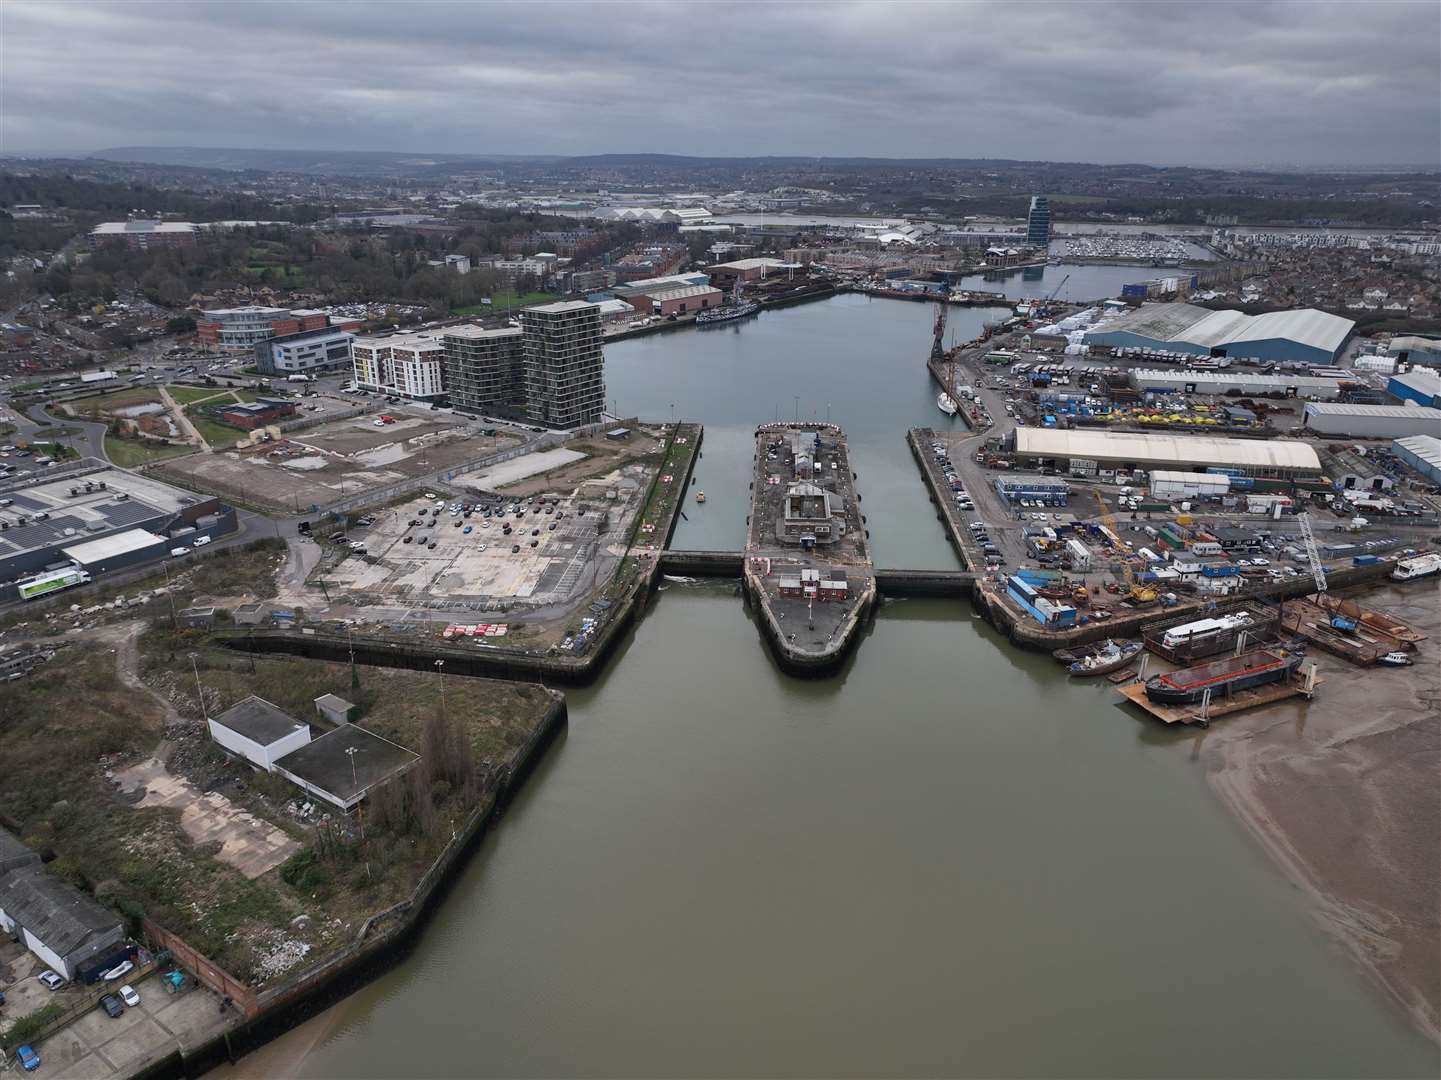 Chatham Docks and Chatham Waters which are subject to plans for redevelopment by Peel L&P. Picture: Phil Drew